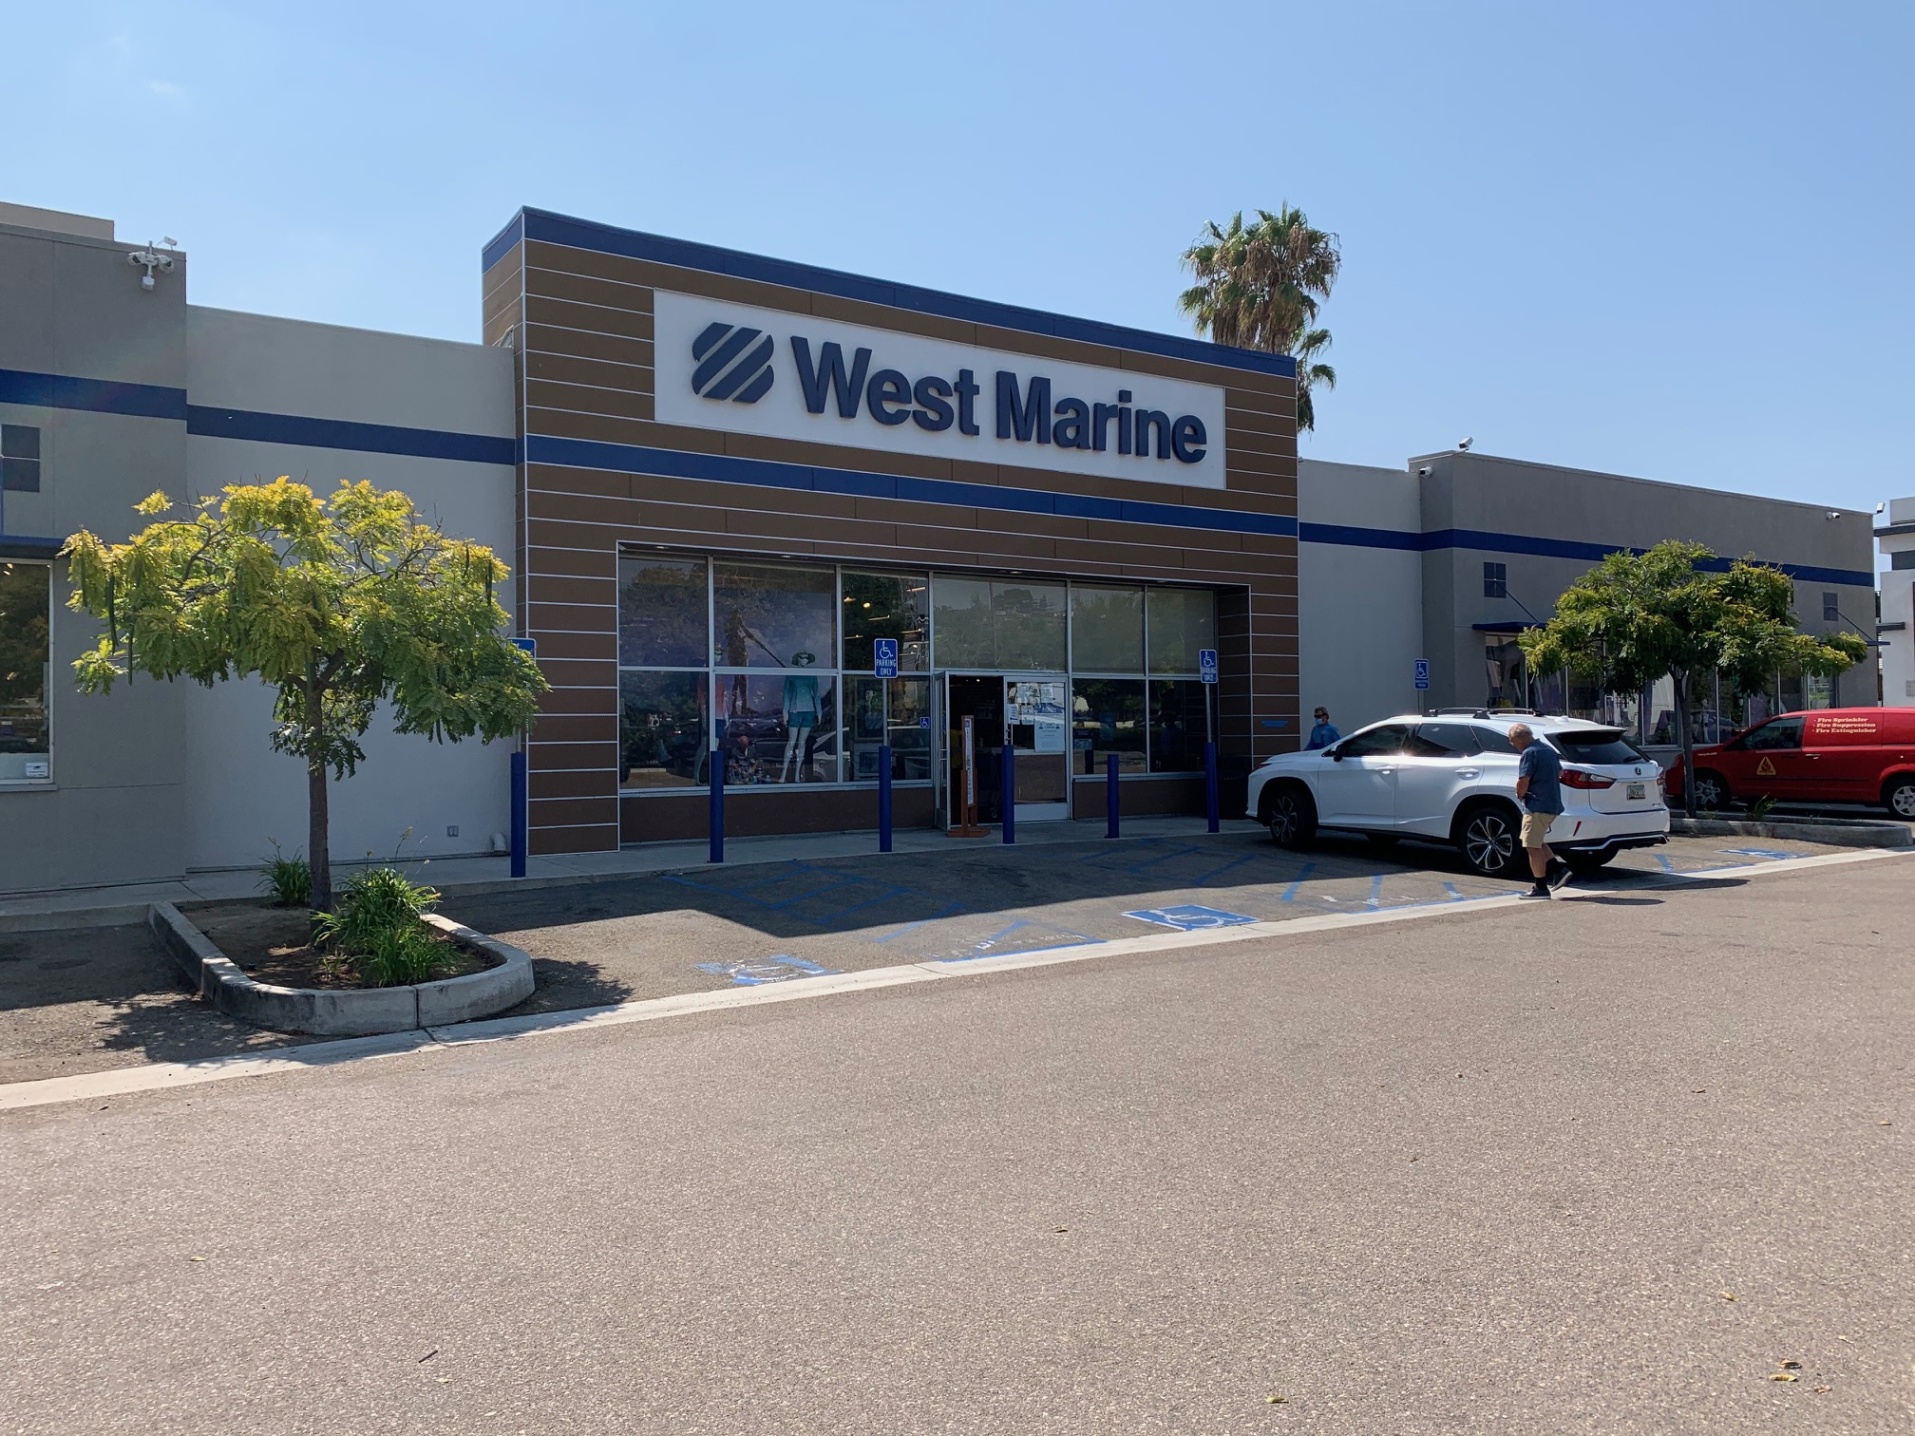 boating accessories near me Niche Utama Home Boat Supplies, Fishing Gear & More - San Diego, CA   West